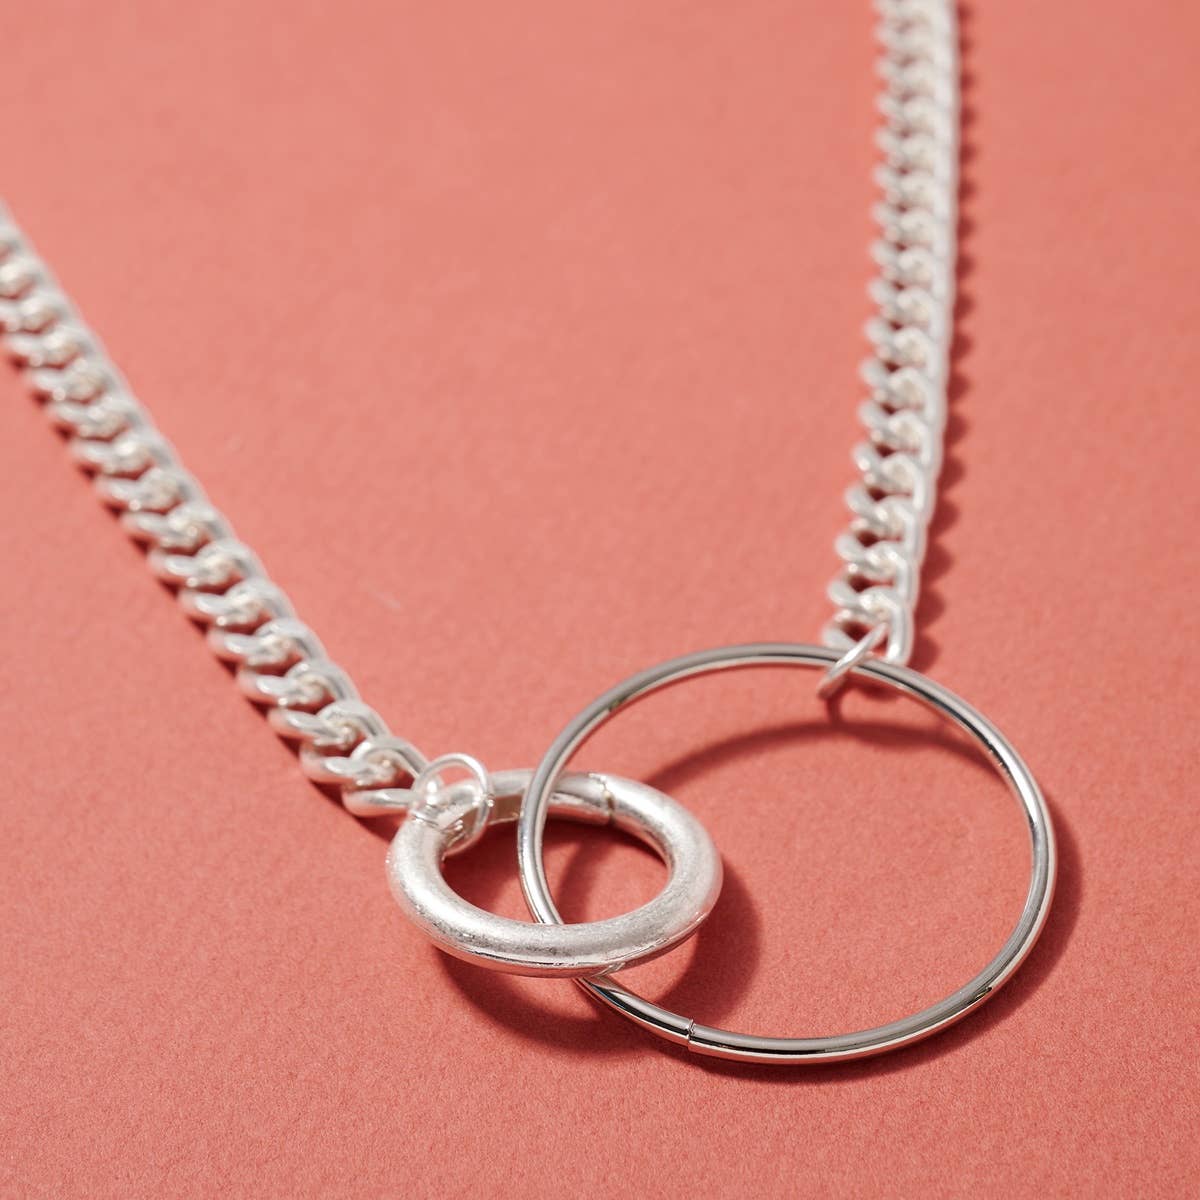 Linked Rings Charms Metal Necklace